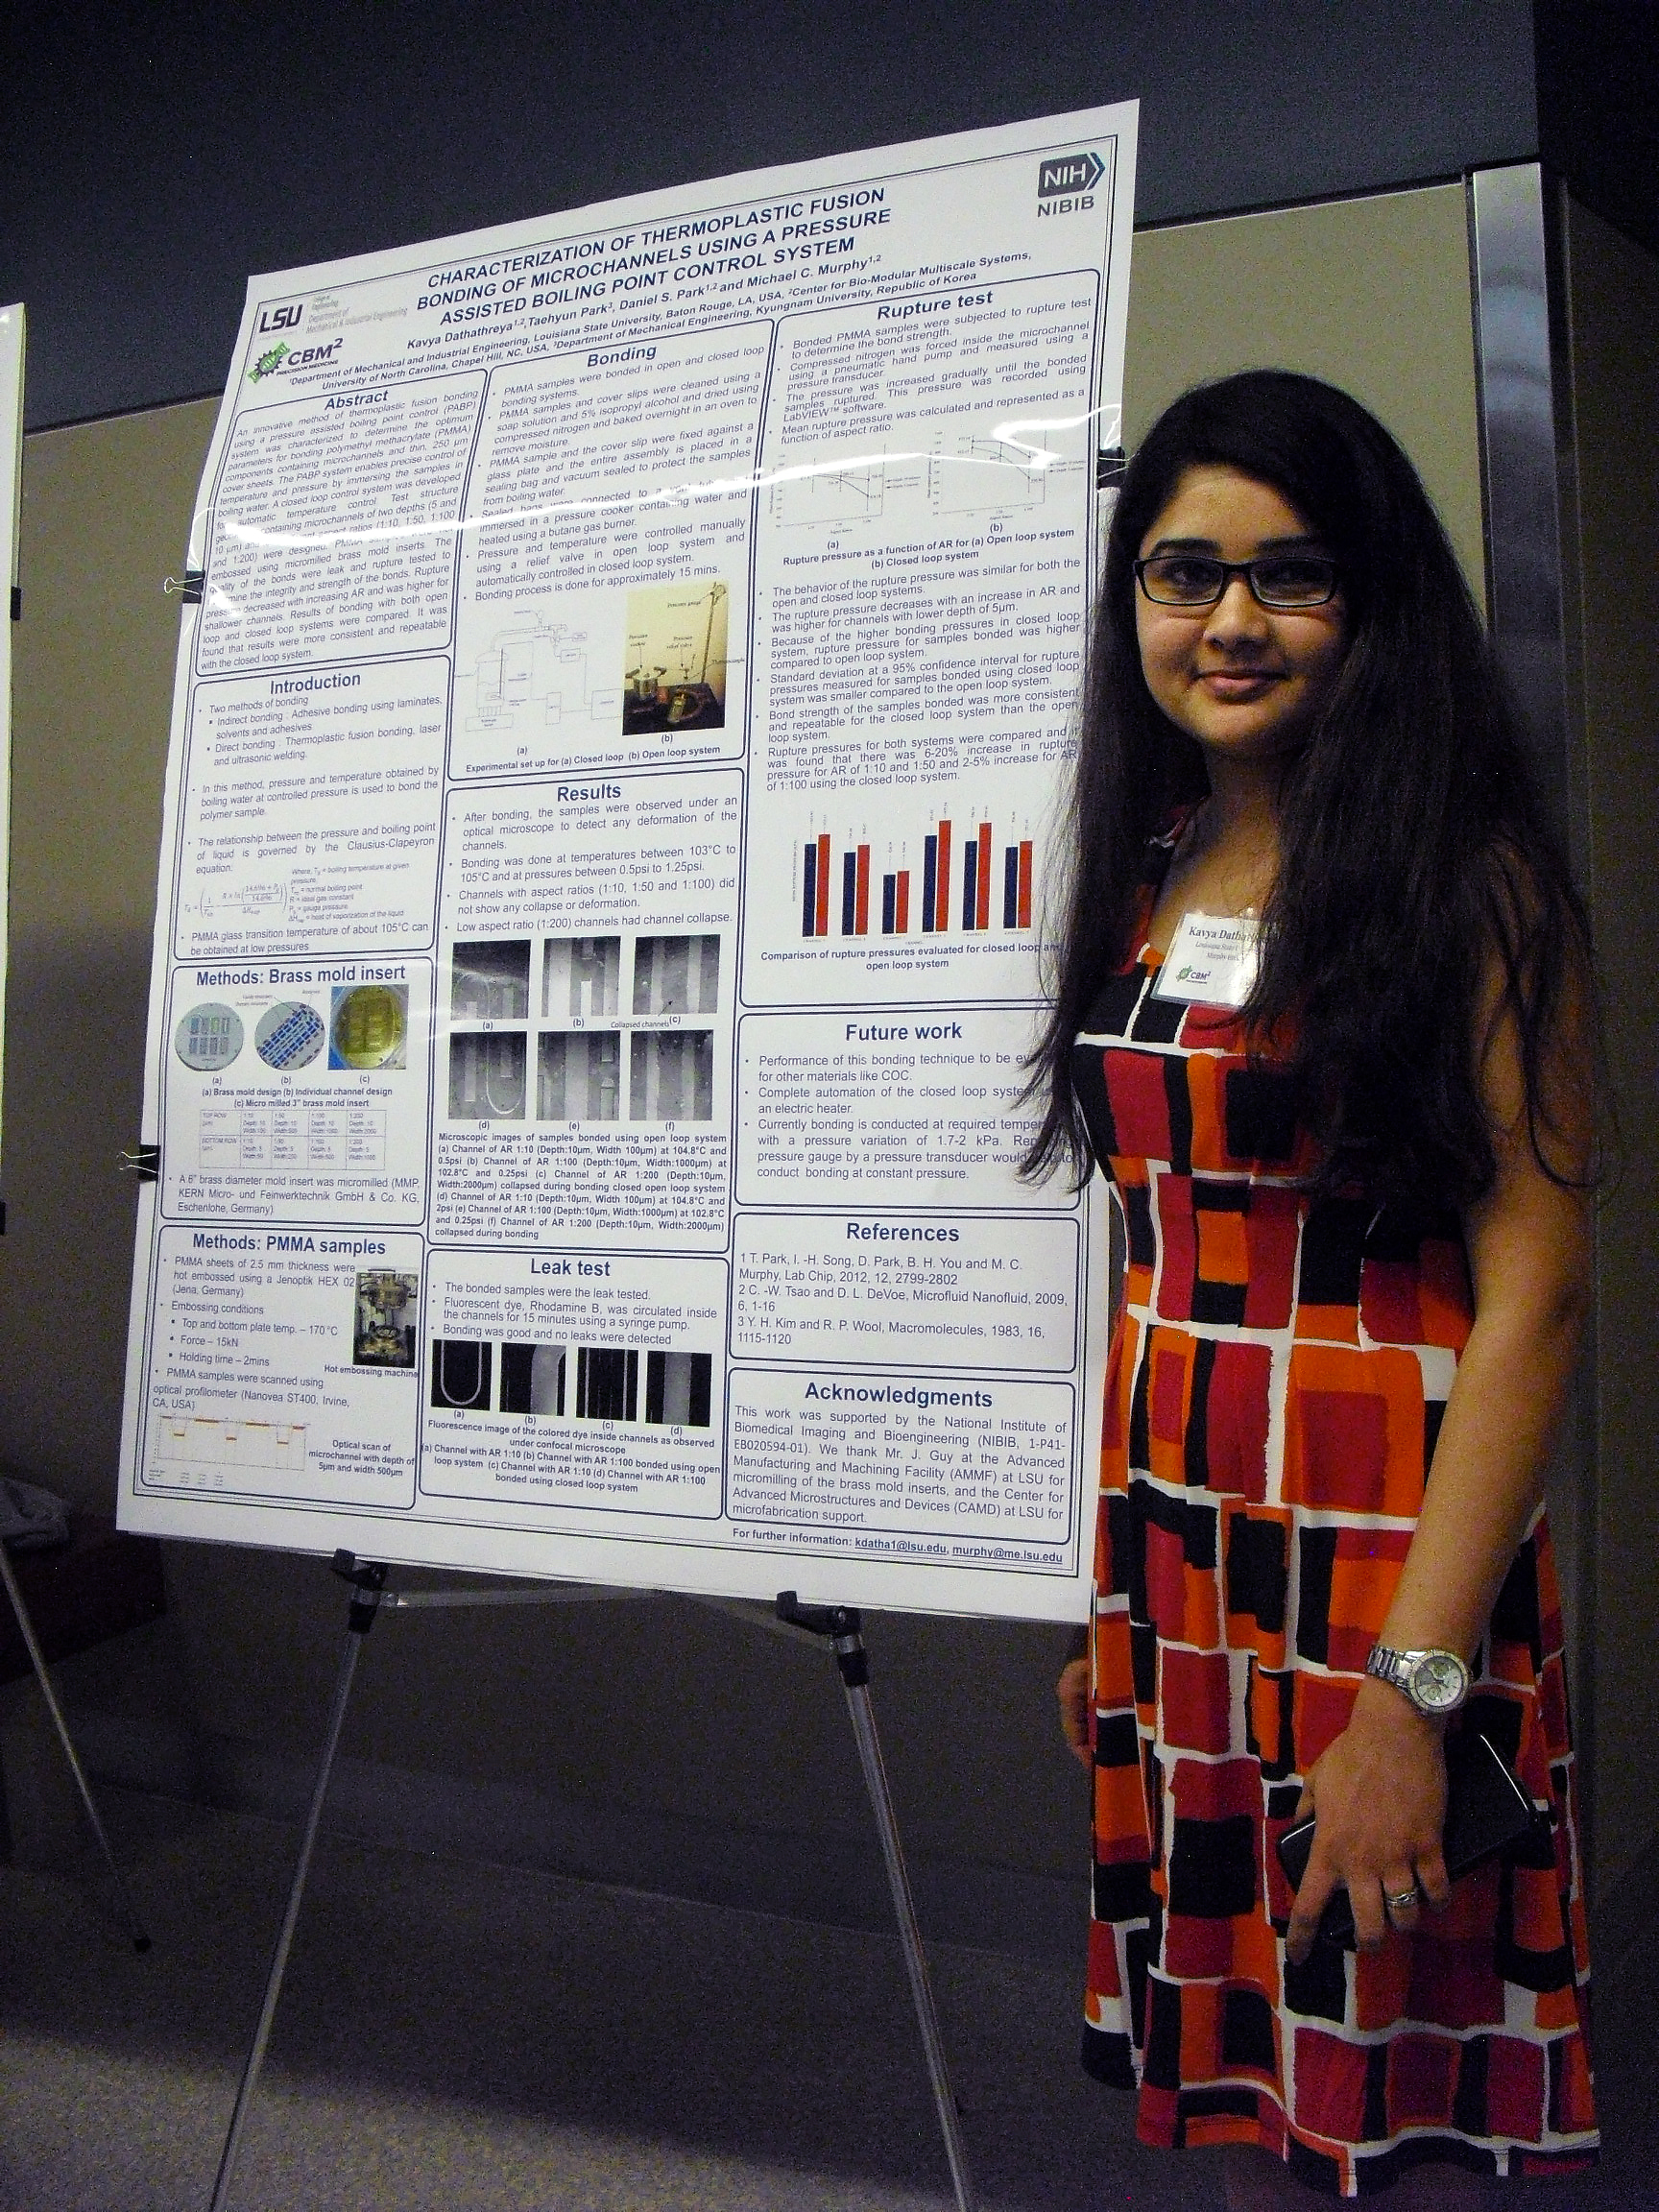 A student standing alone next to their displayed research poster.